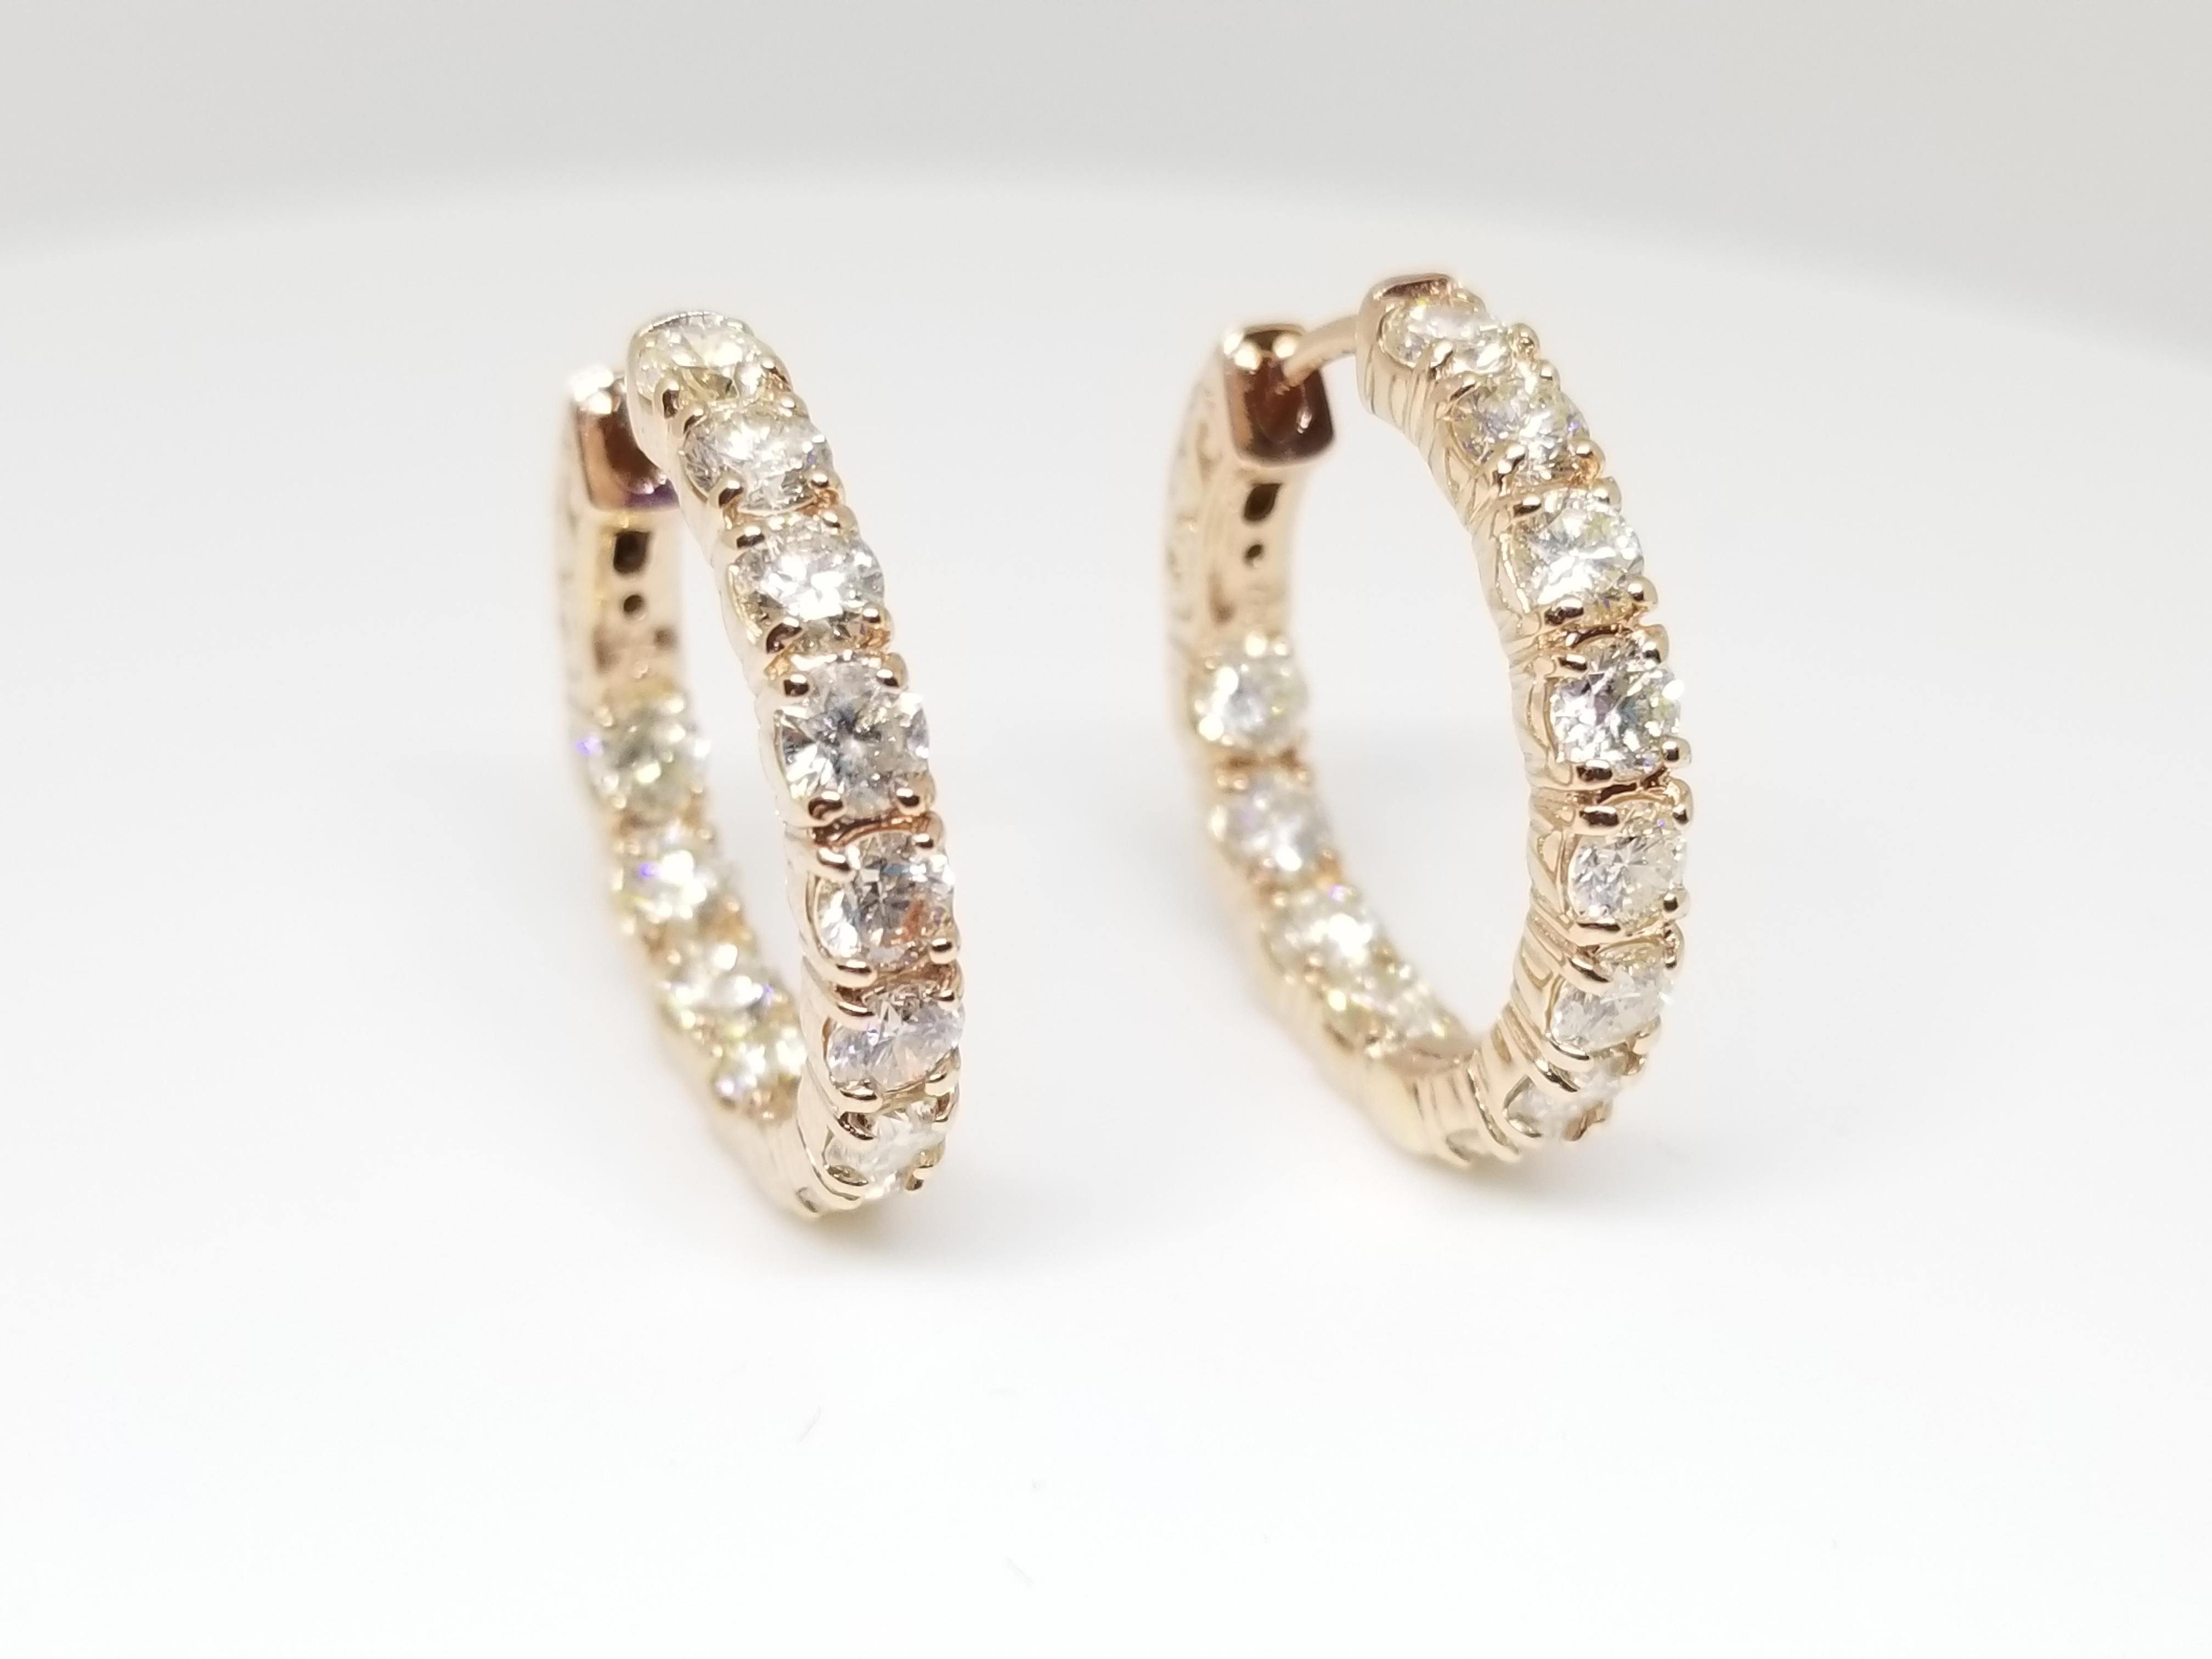 Beautiful pair of huggie diamond inside out hoop earrings available in 14k rose gold. Secures with snap closure for wear.  Measures 3/4 inch or 2mm in diameter. Beautiful stock for the holiday!

Also available in white and yellow gold.